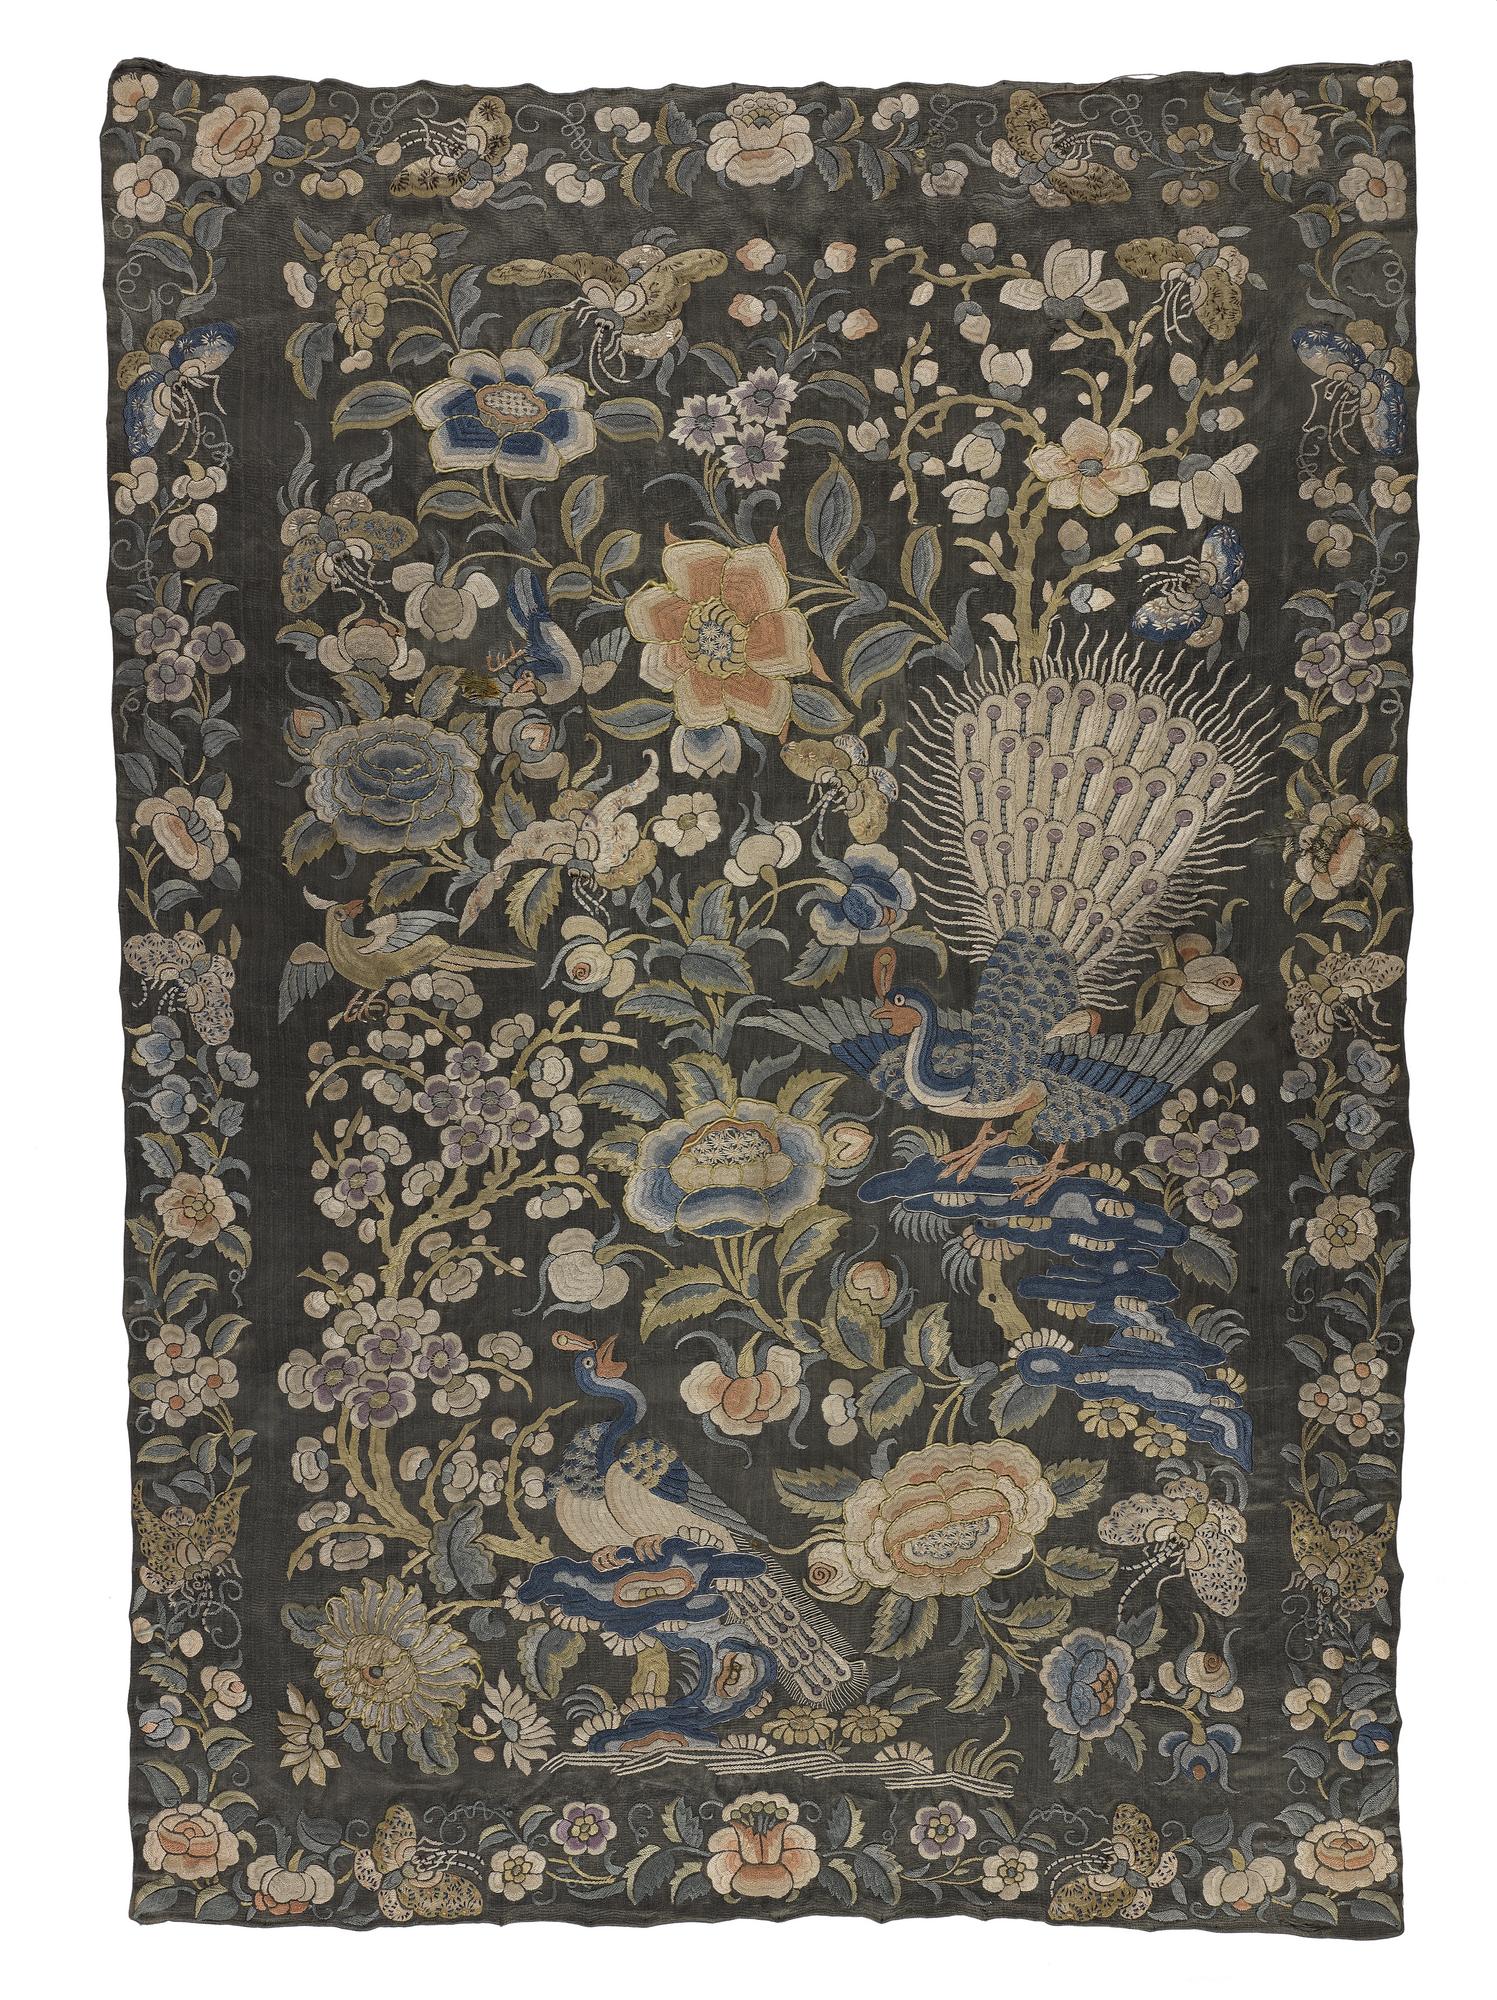 Sage green satin panel embroidered in coloured silks and showing a design of peacocks, birds and flowering plants surrounded by a floral border: China, possibly early 19th century.